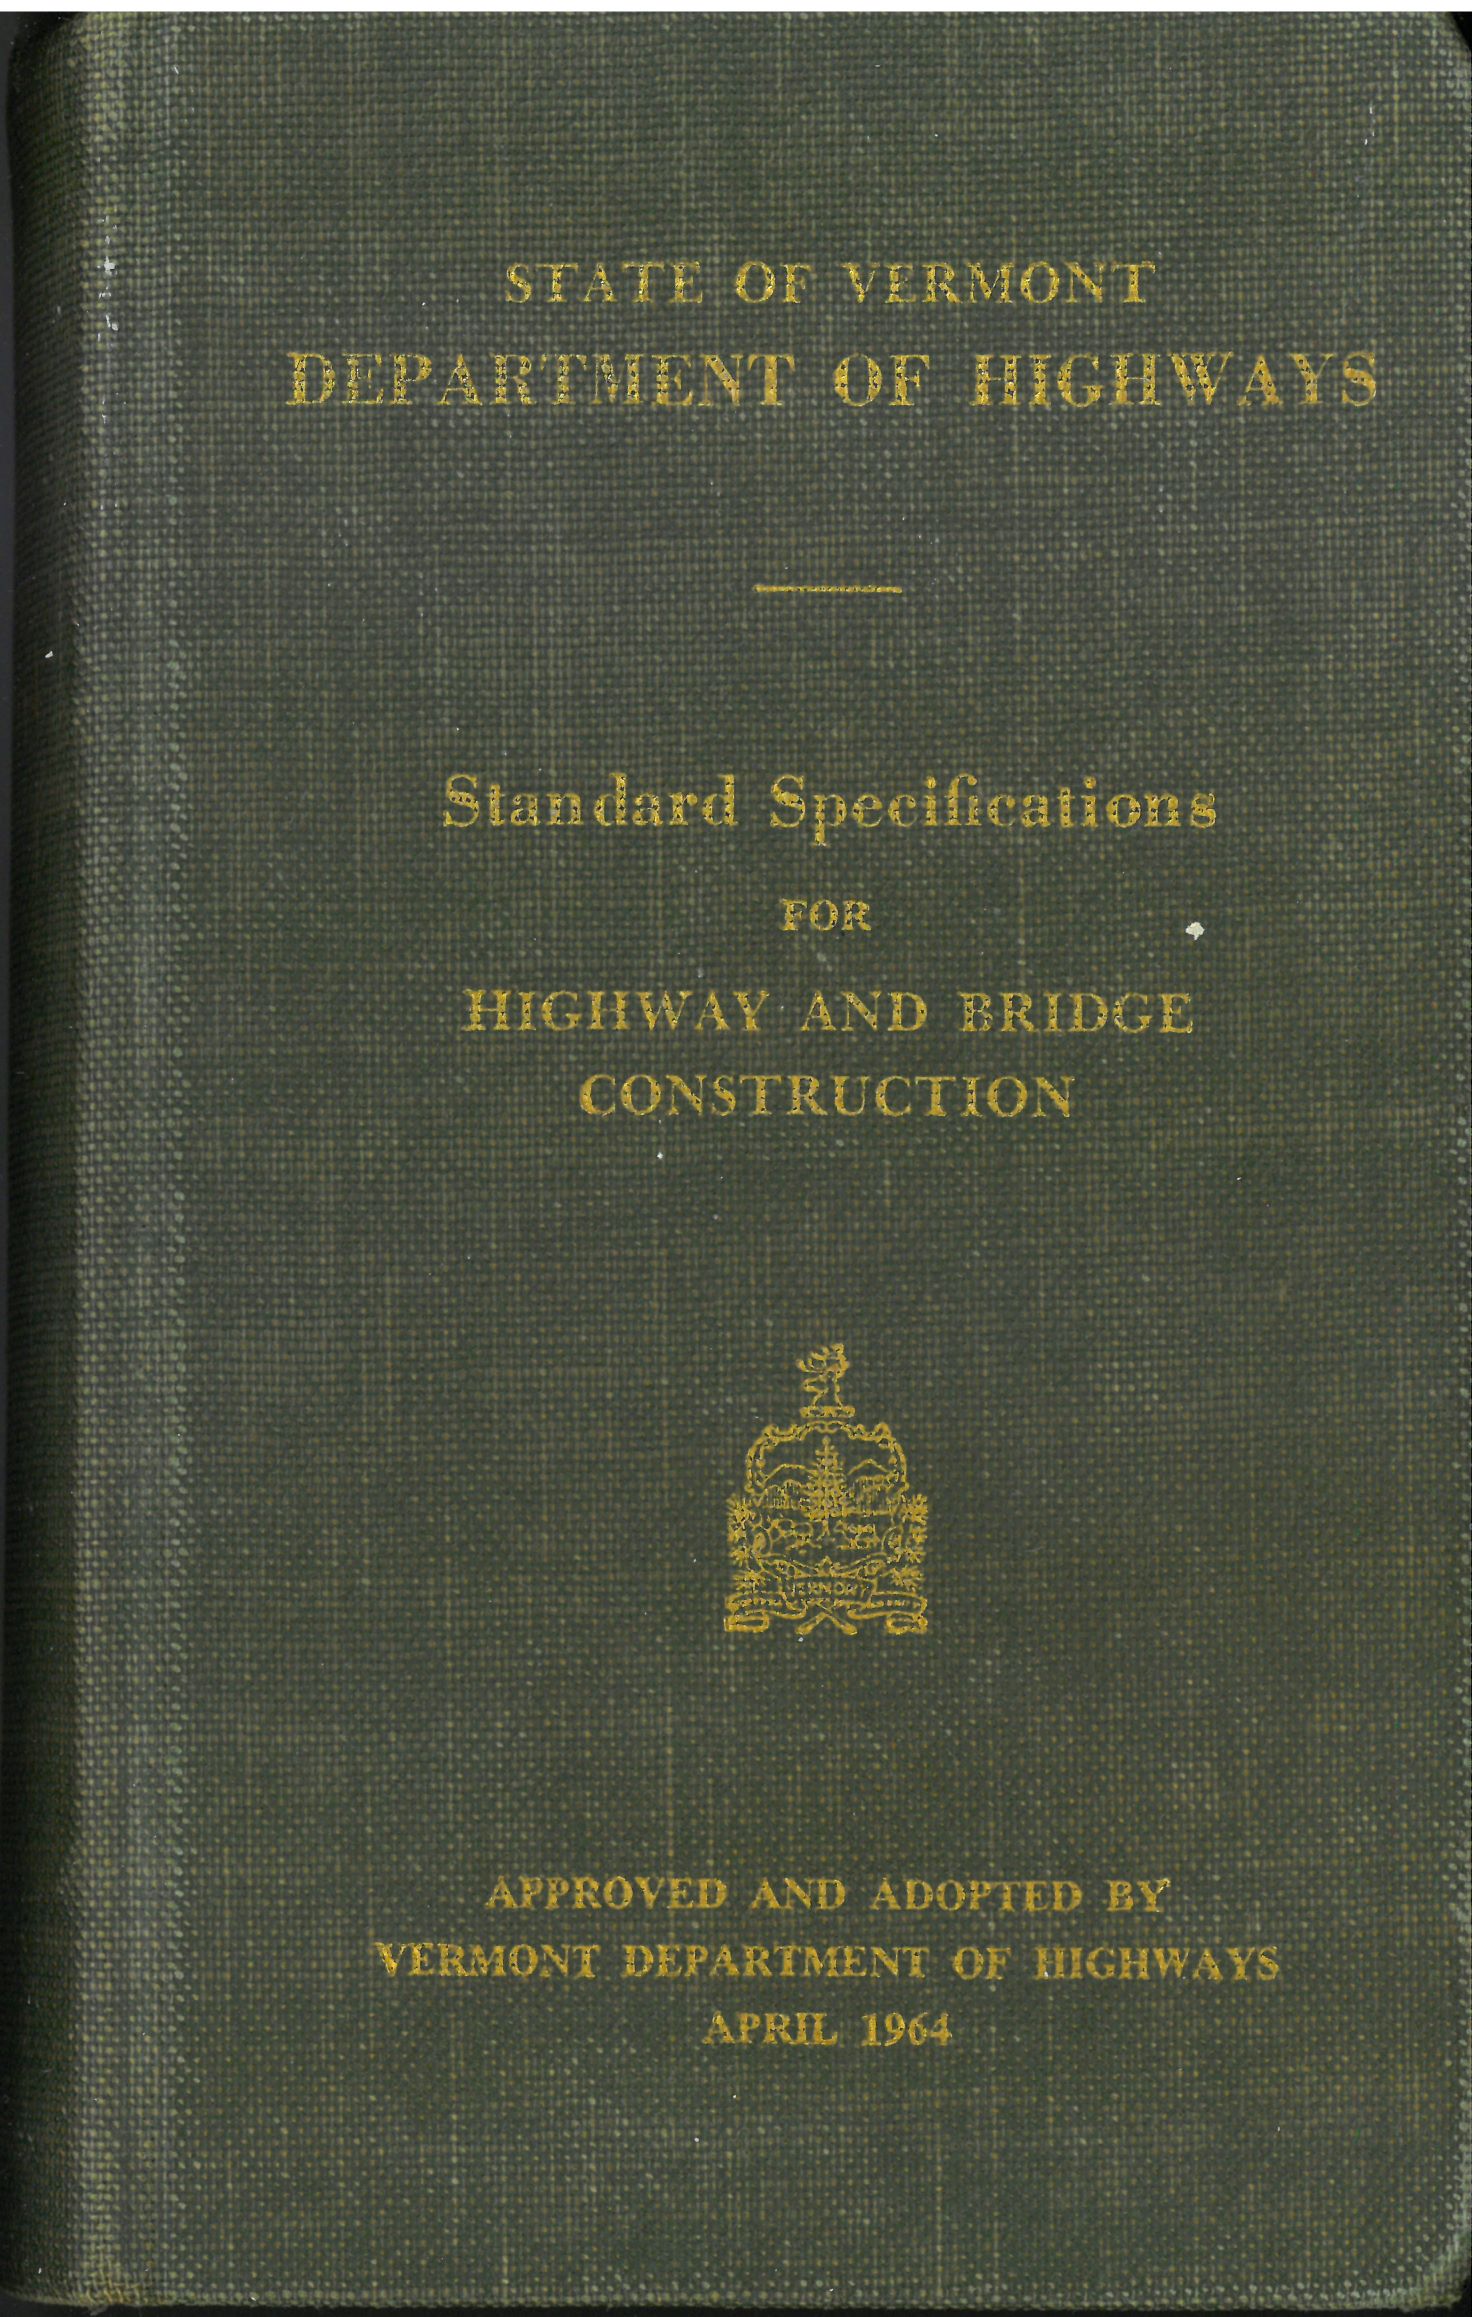 1964 Standard Specifications for Highway and Bridge Construction Book Cover